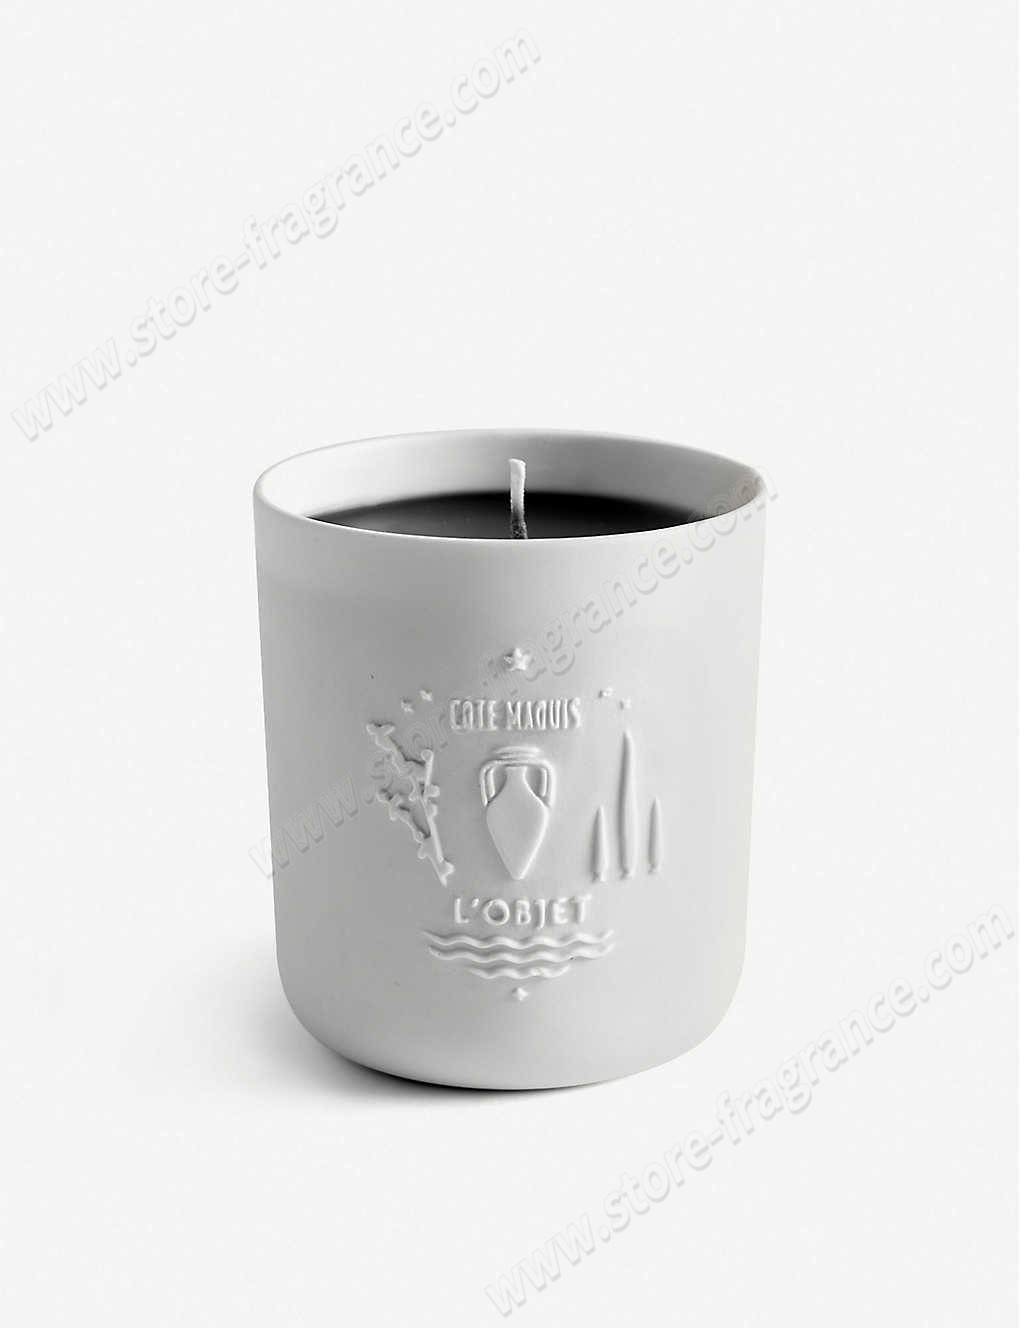 L'OBJET/Côté Maquis scented embossed candle 285g ✿ Discount Store - -1